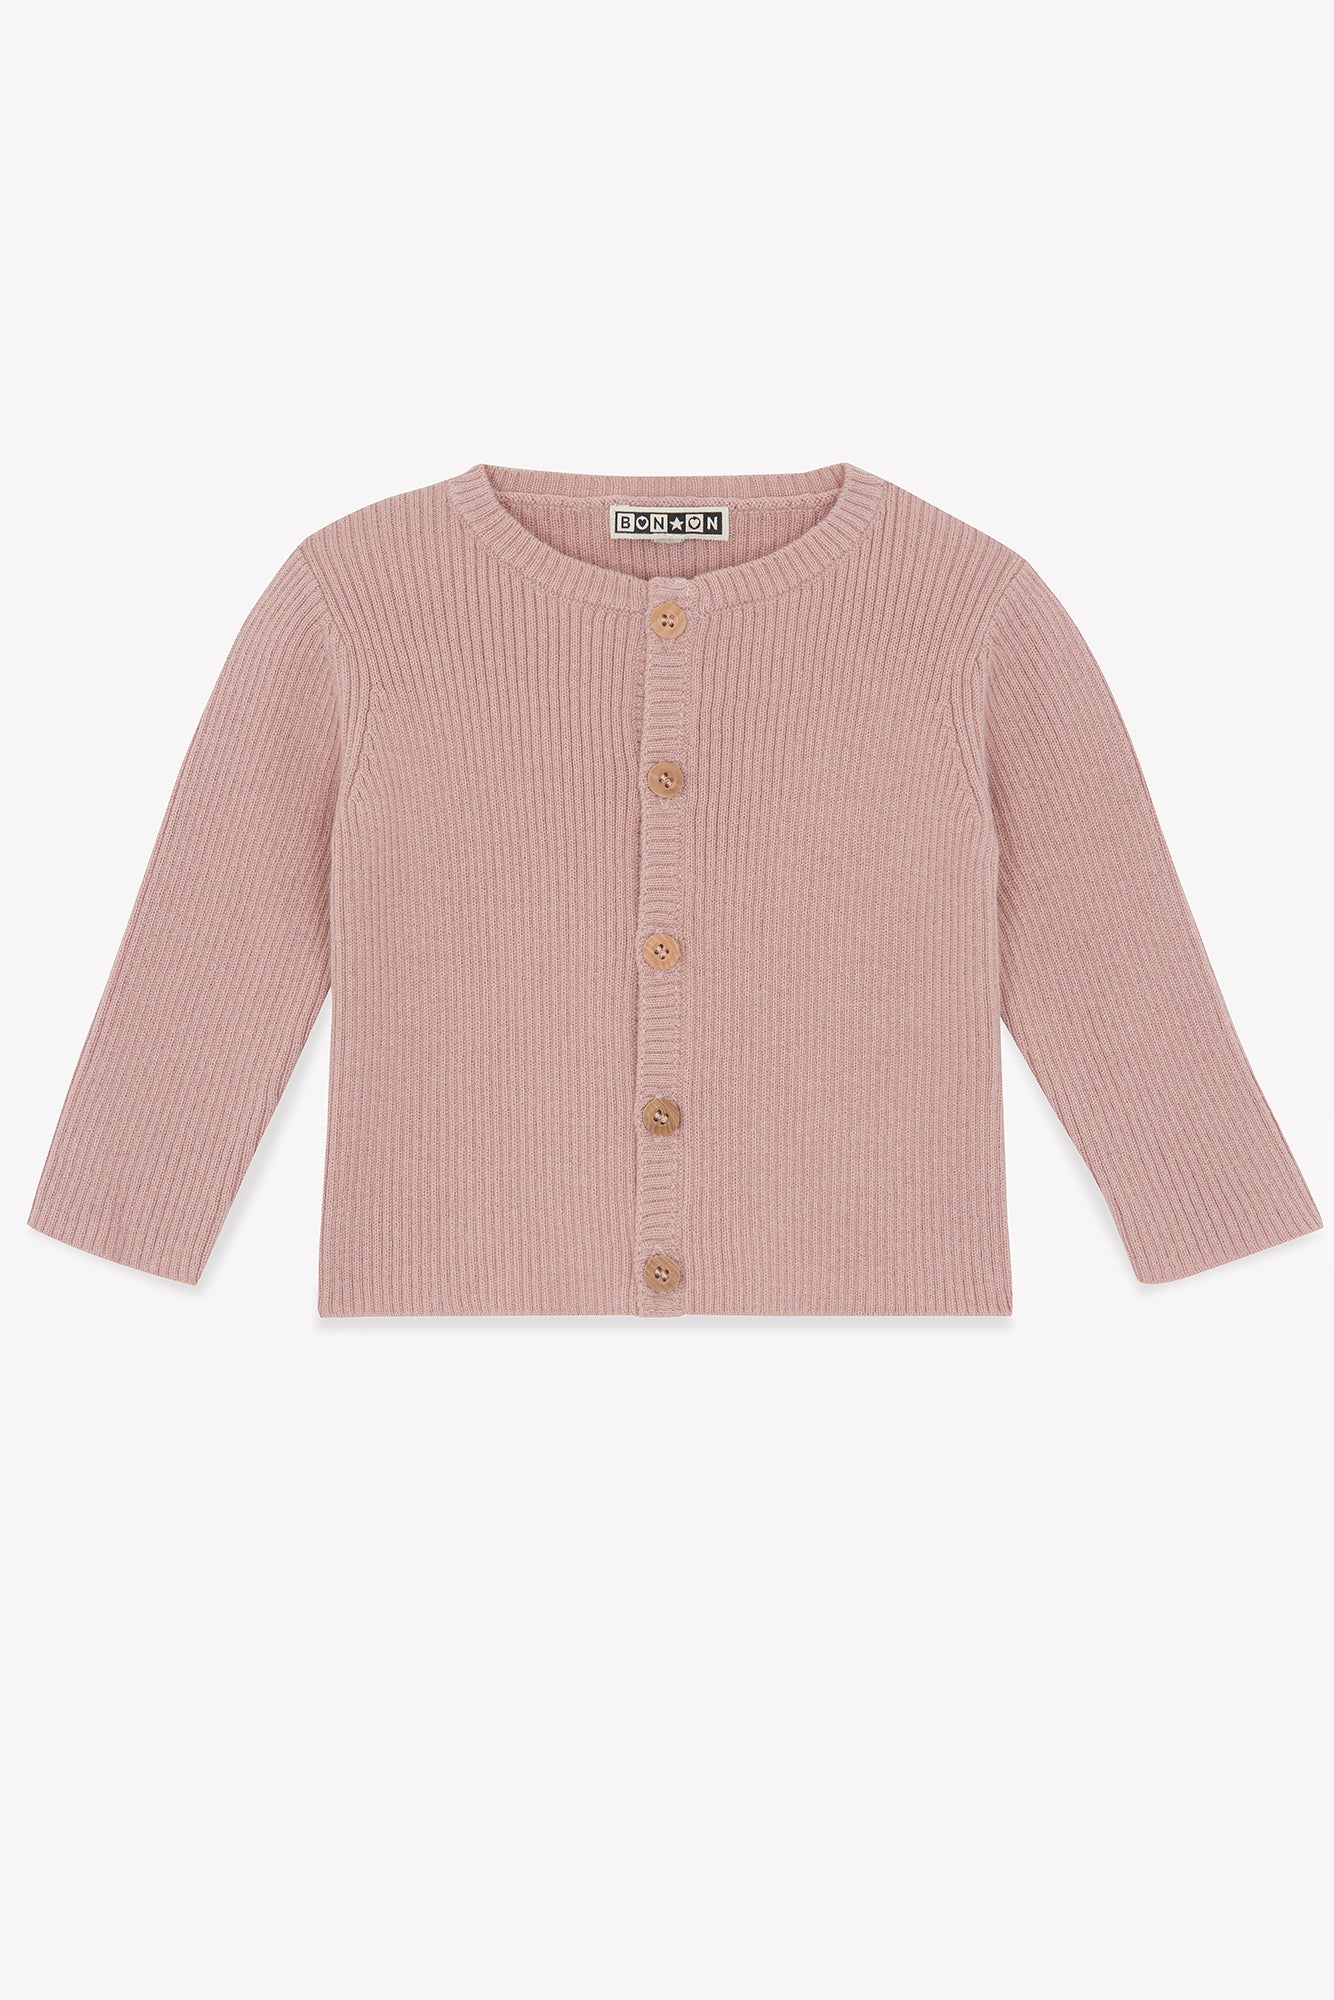 Cardigan - Minot Pink Baby in a knit